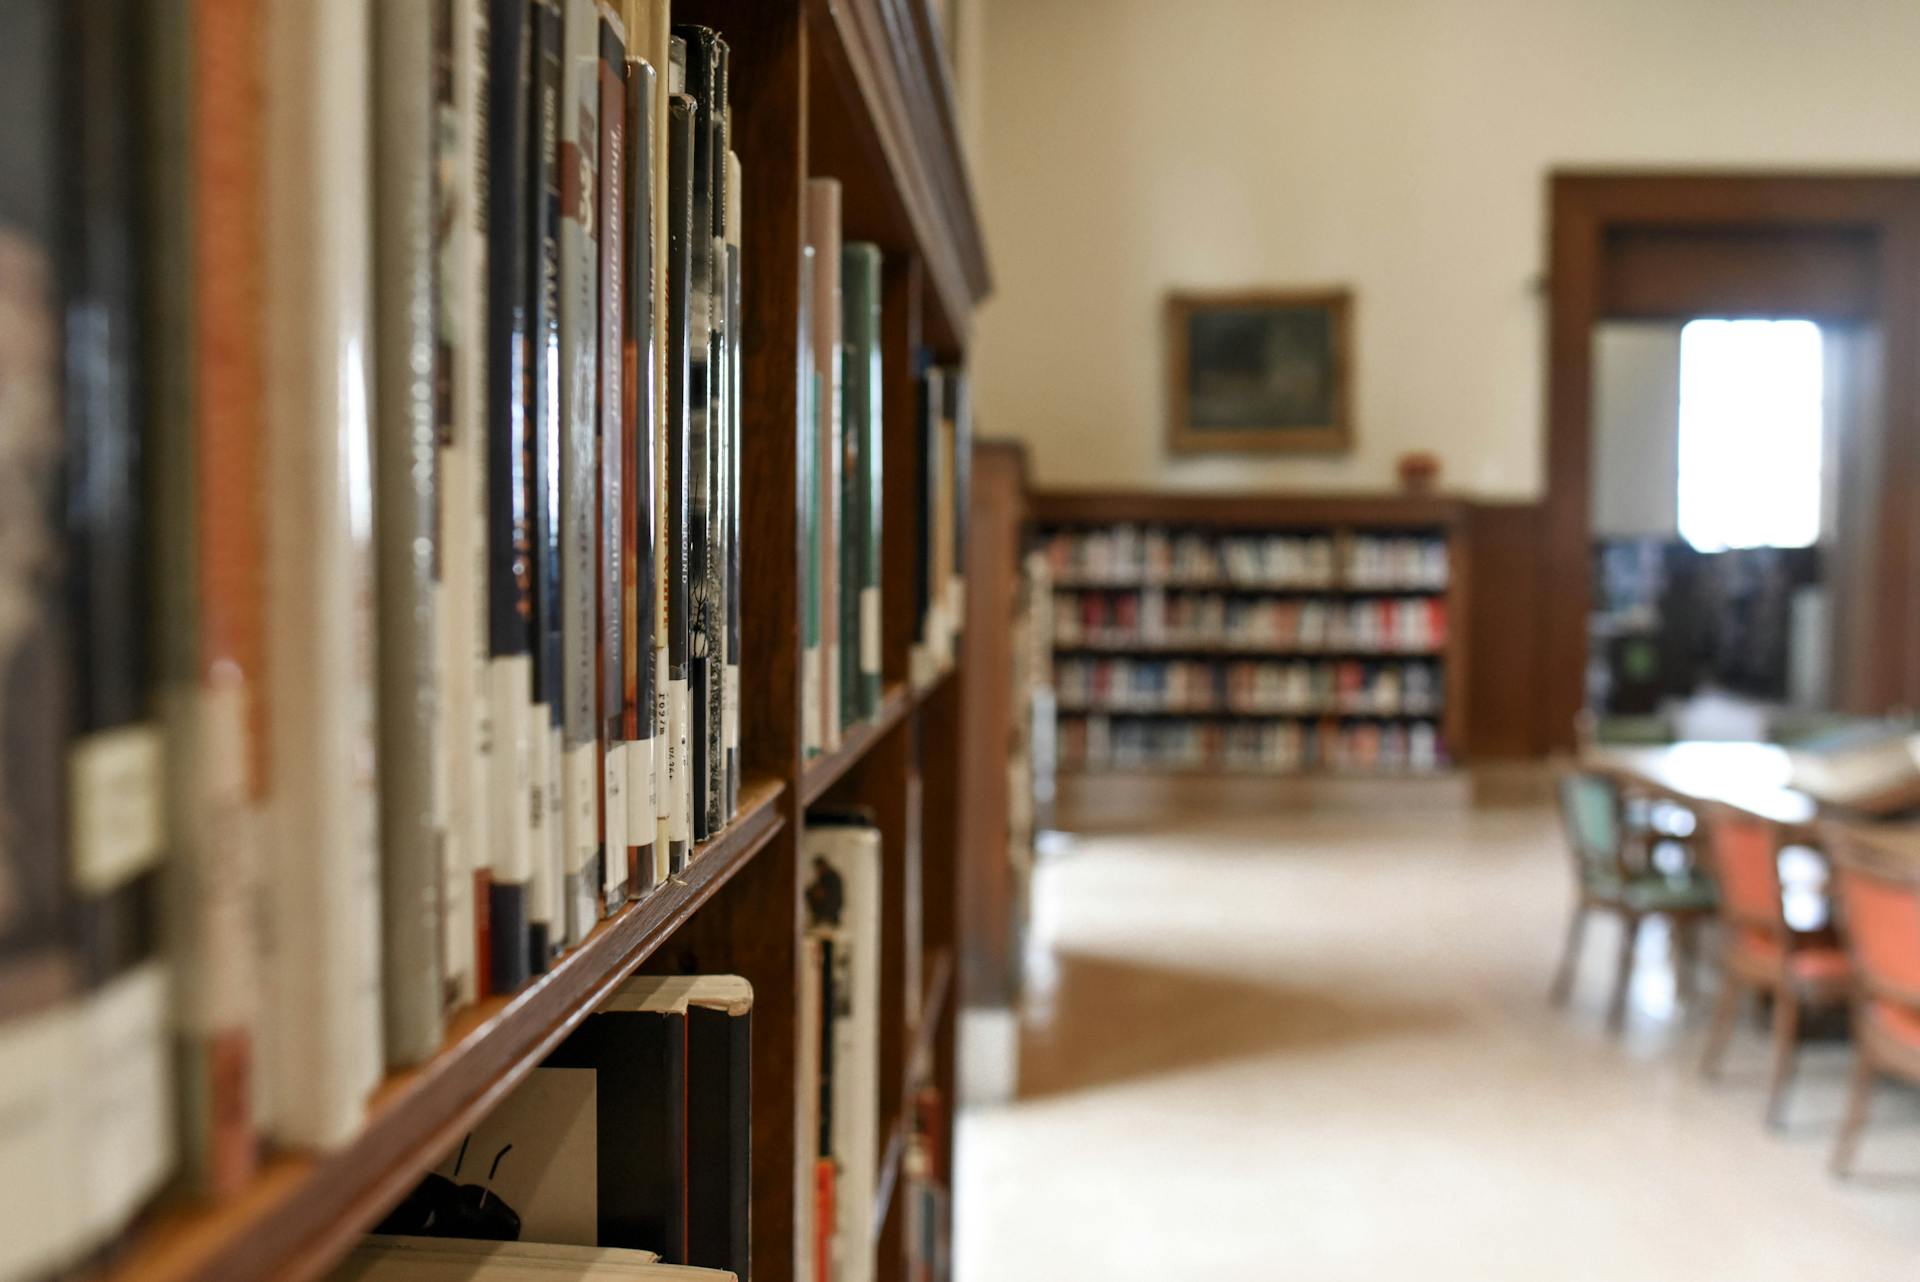 A library | Source: Pexels